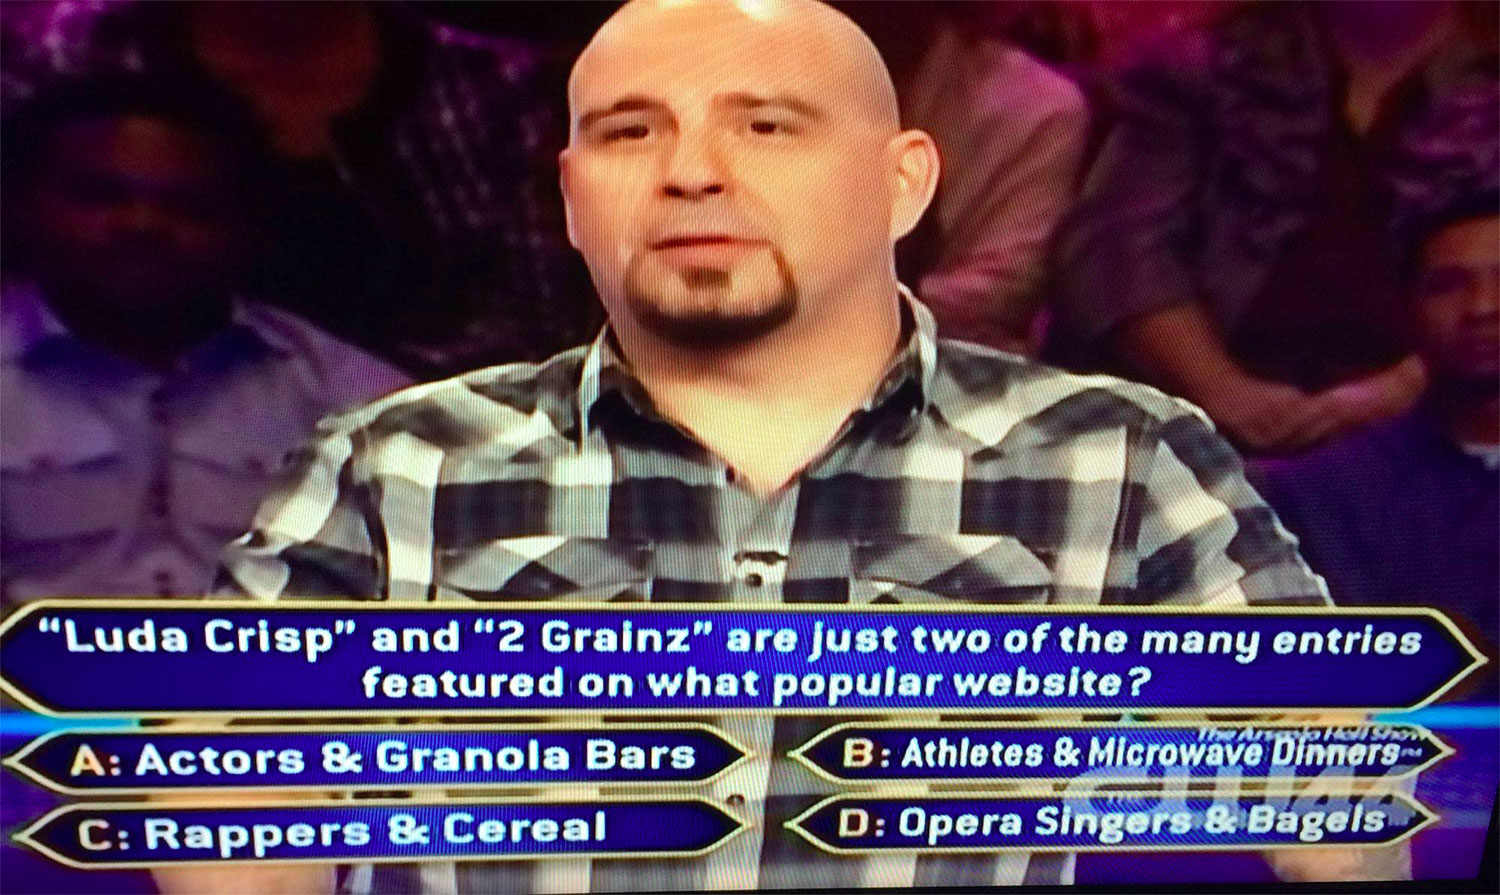 Rappers and Cereal on Who Wants to be Millionaire